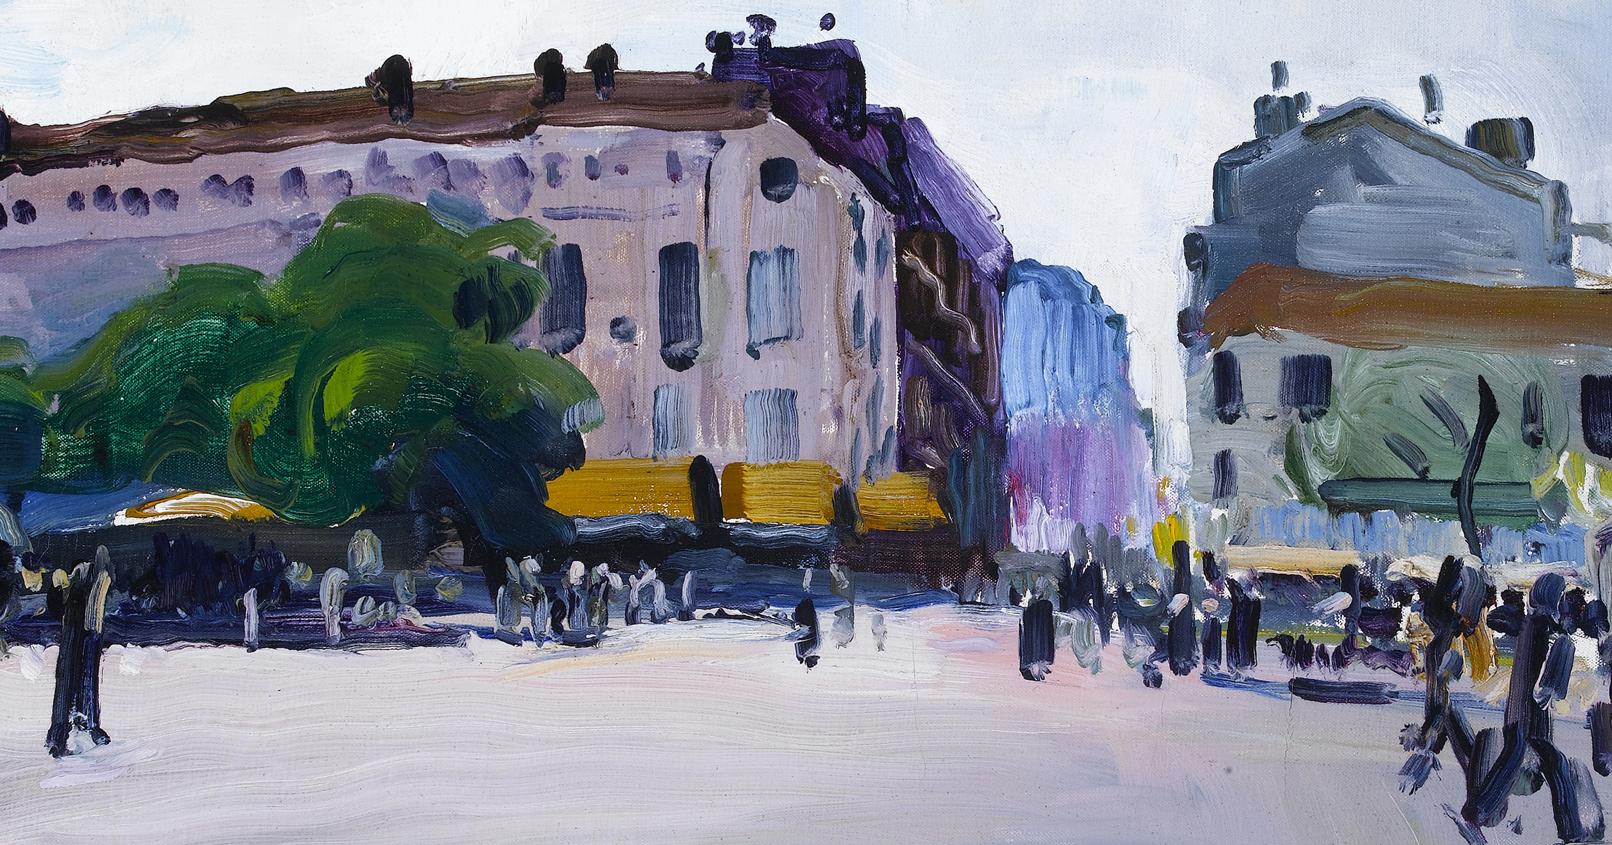 'Place de la Bataille' Busy French Paris Street Scene with Figures, Buildings  - Abstract Impressionist Painting by Jean Franck Baudoin